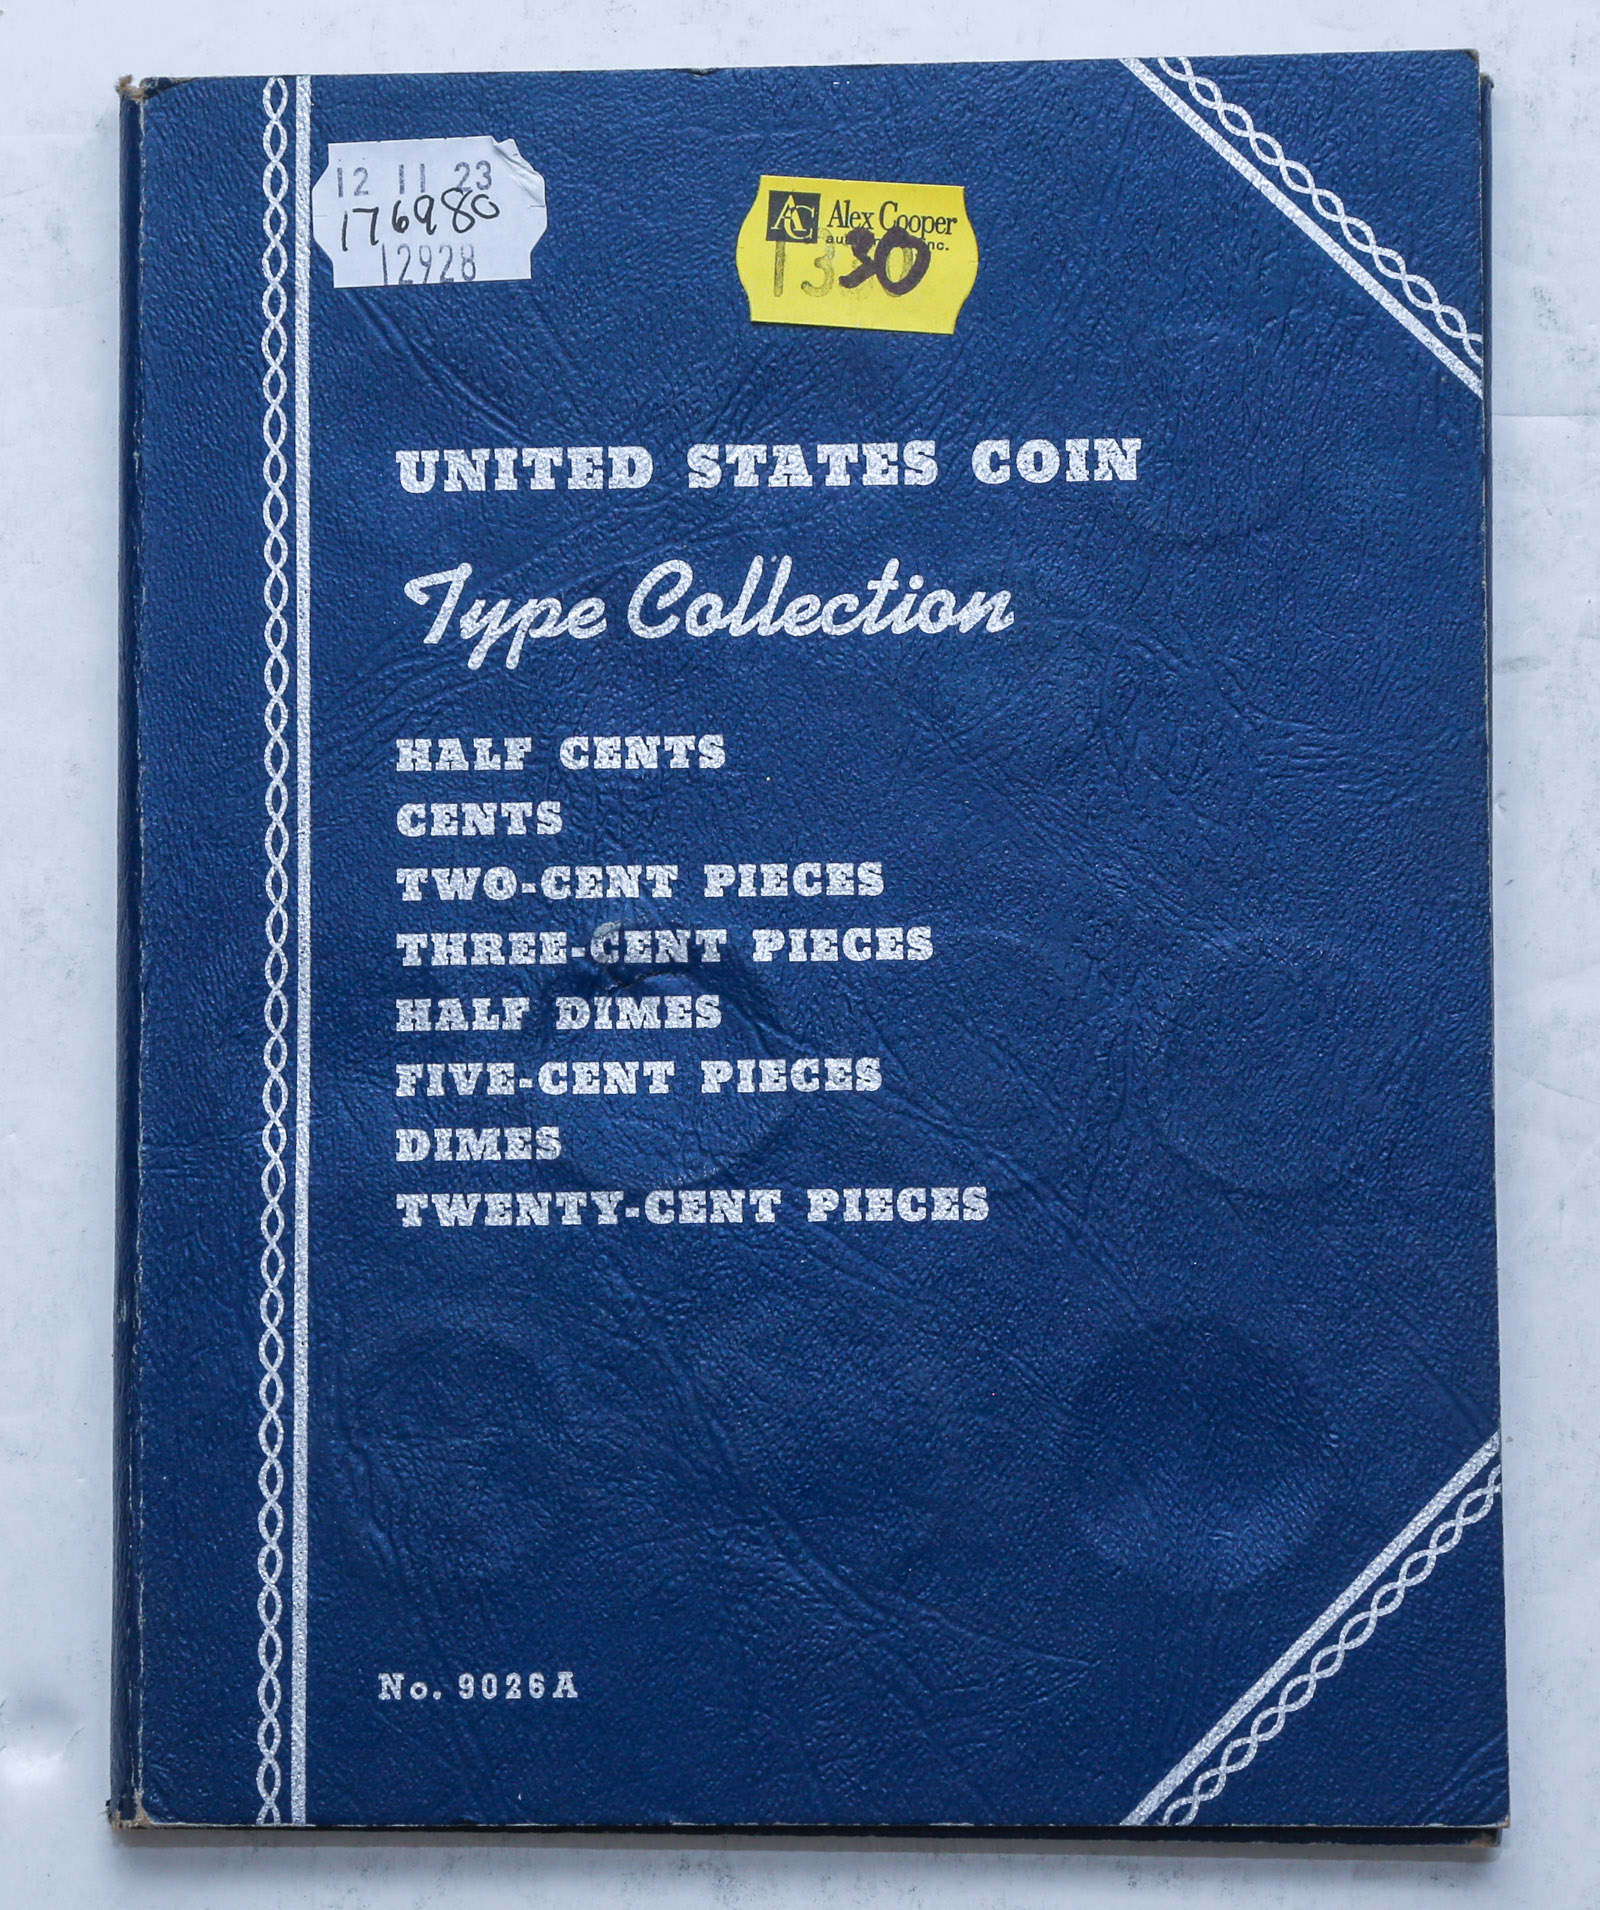 U S TYPE COLLECTION WITH 25 COINS 3cb87a